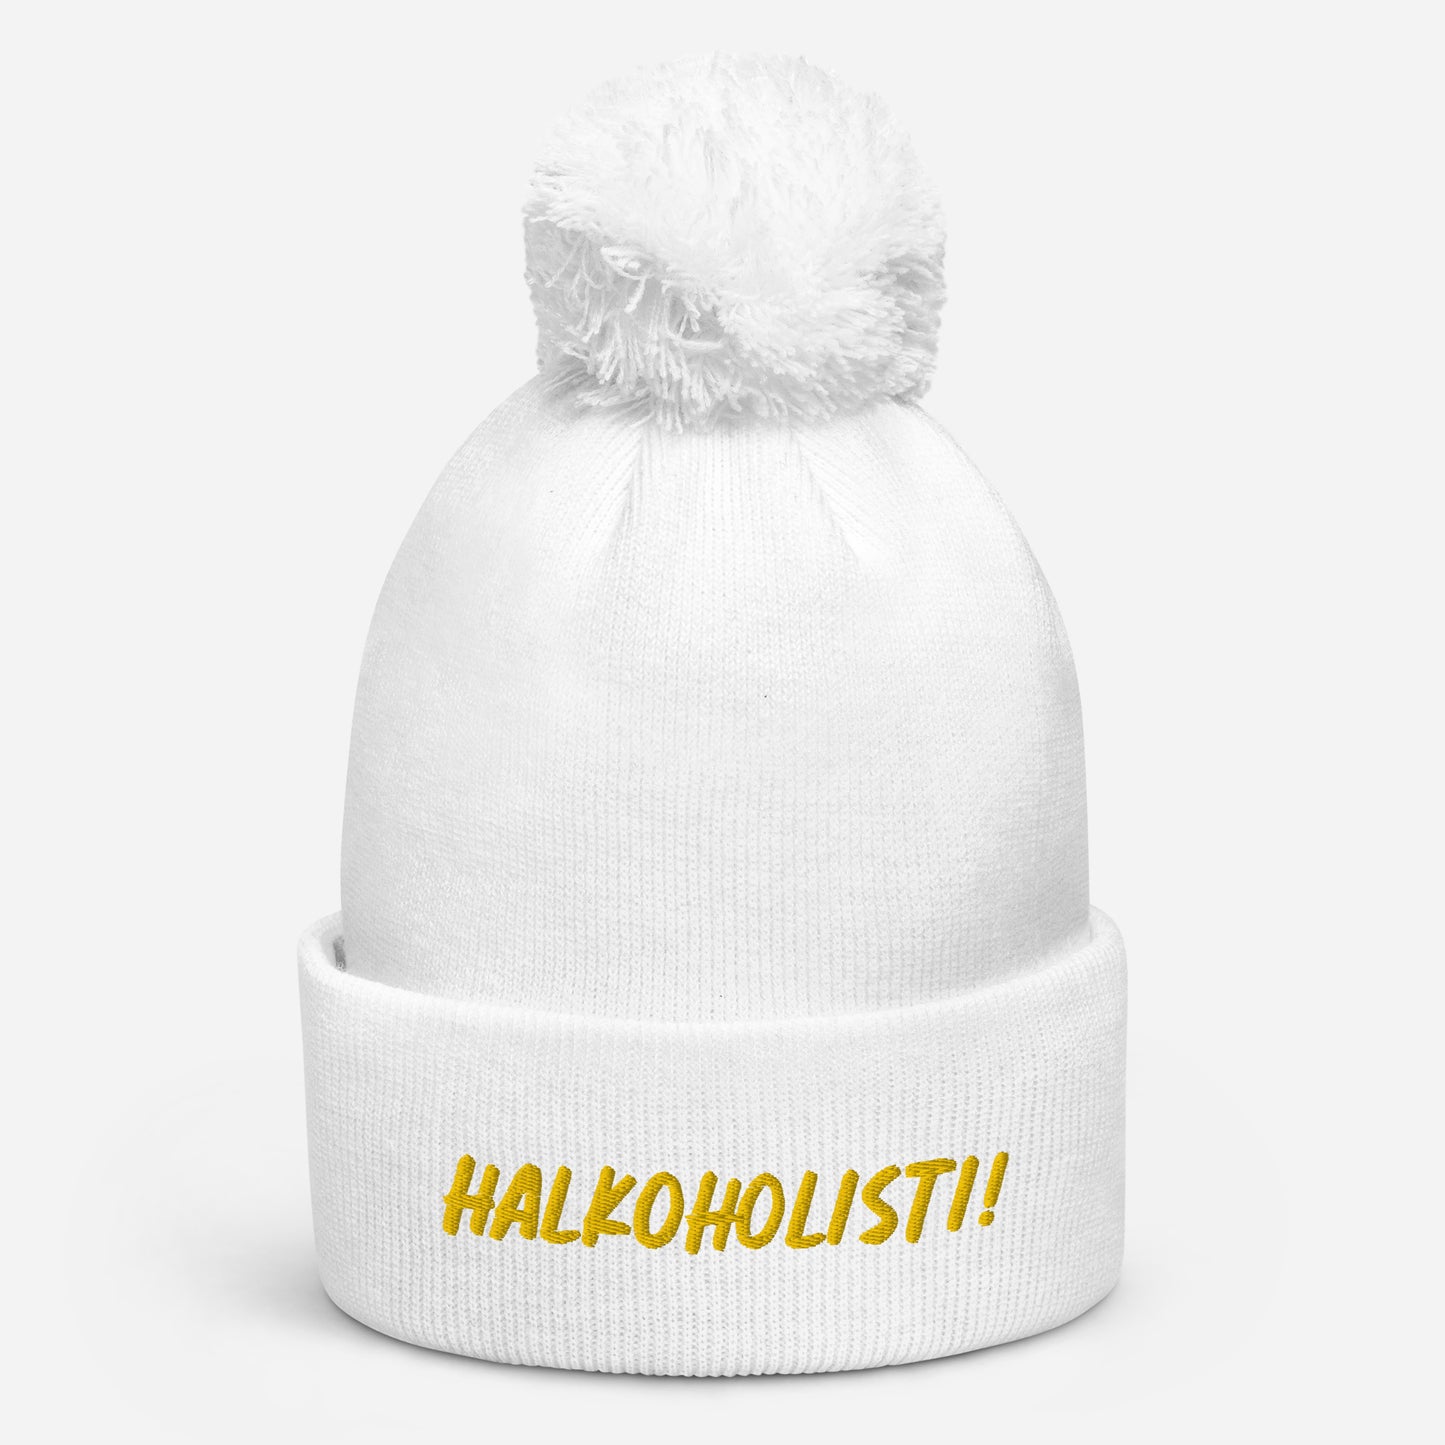 "Alcoholist" beanie with tassel (customer's request)